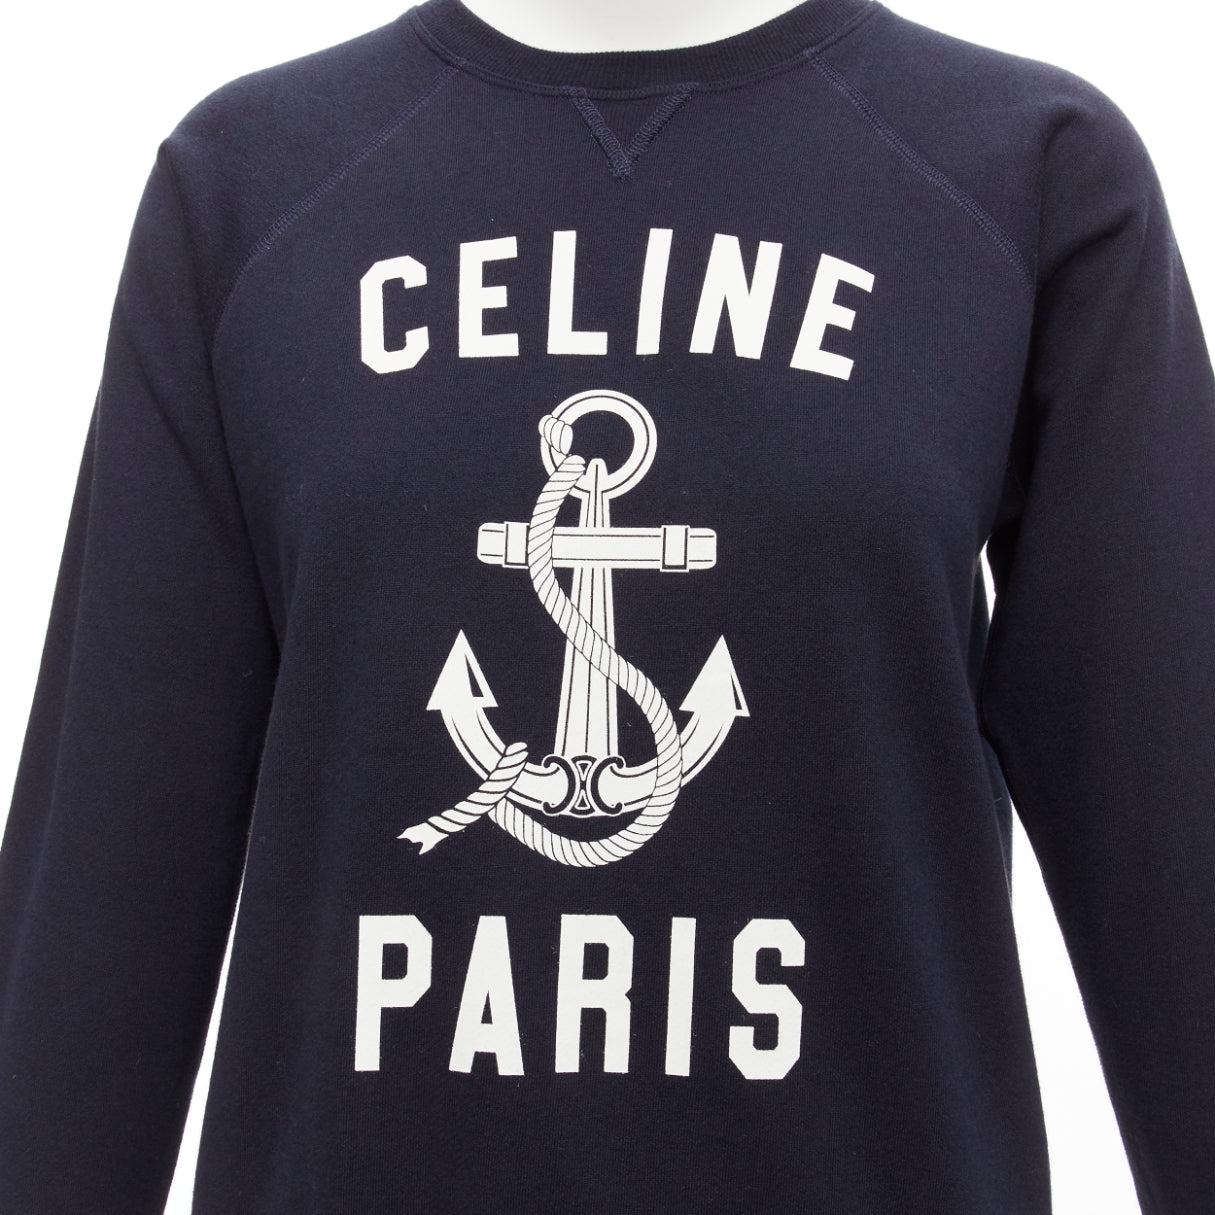 CELINE Anchor navy cotton cashmere logo print crew long sleeve sweatshirt XS
Reference: AAWC/A01098
Brand: Celine
Designer: Hedi Slimane
Material: Cotton, Cashmere
Color: Navy, White
Pattern: Logomania
Closure: Pullover
Made in: